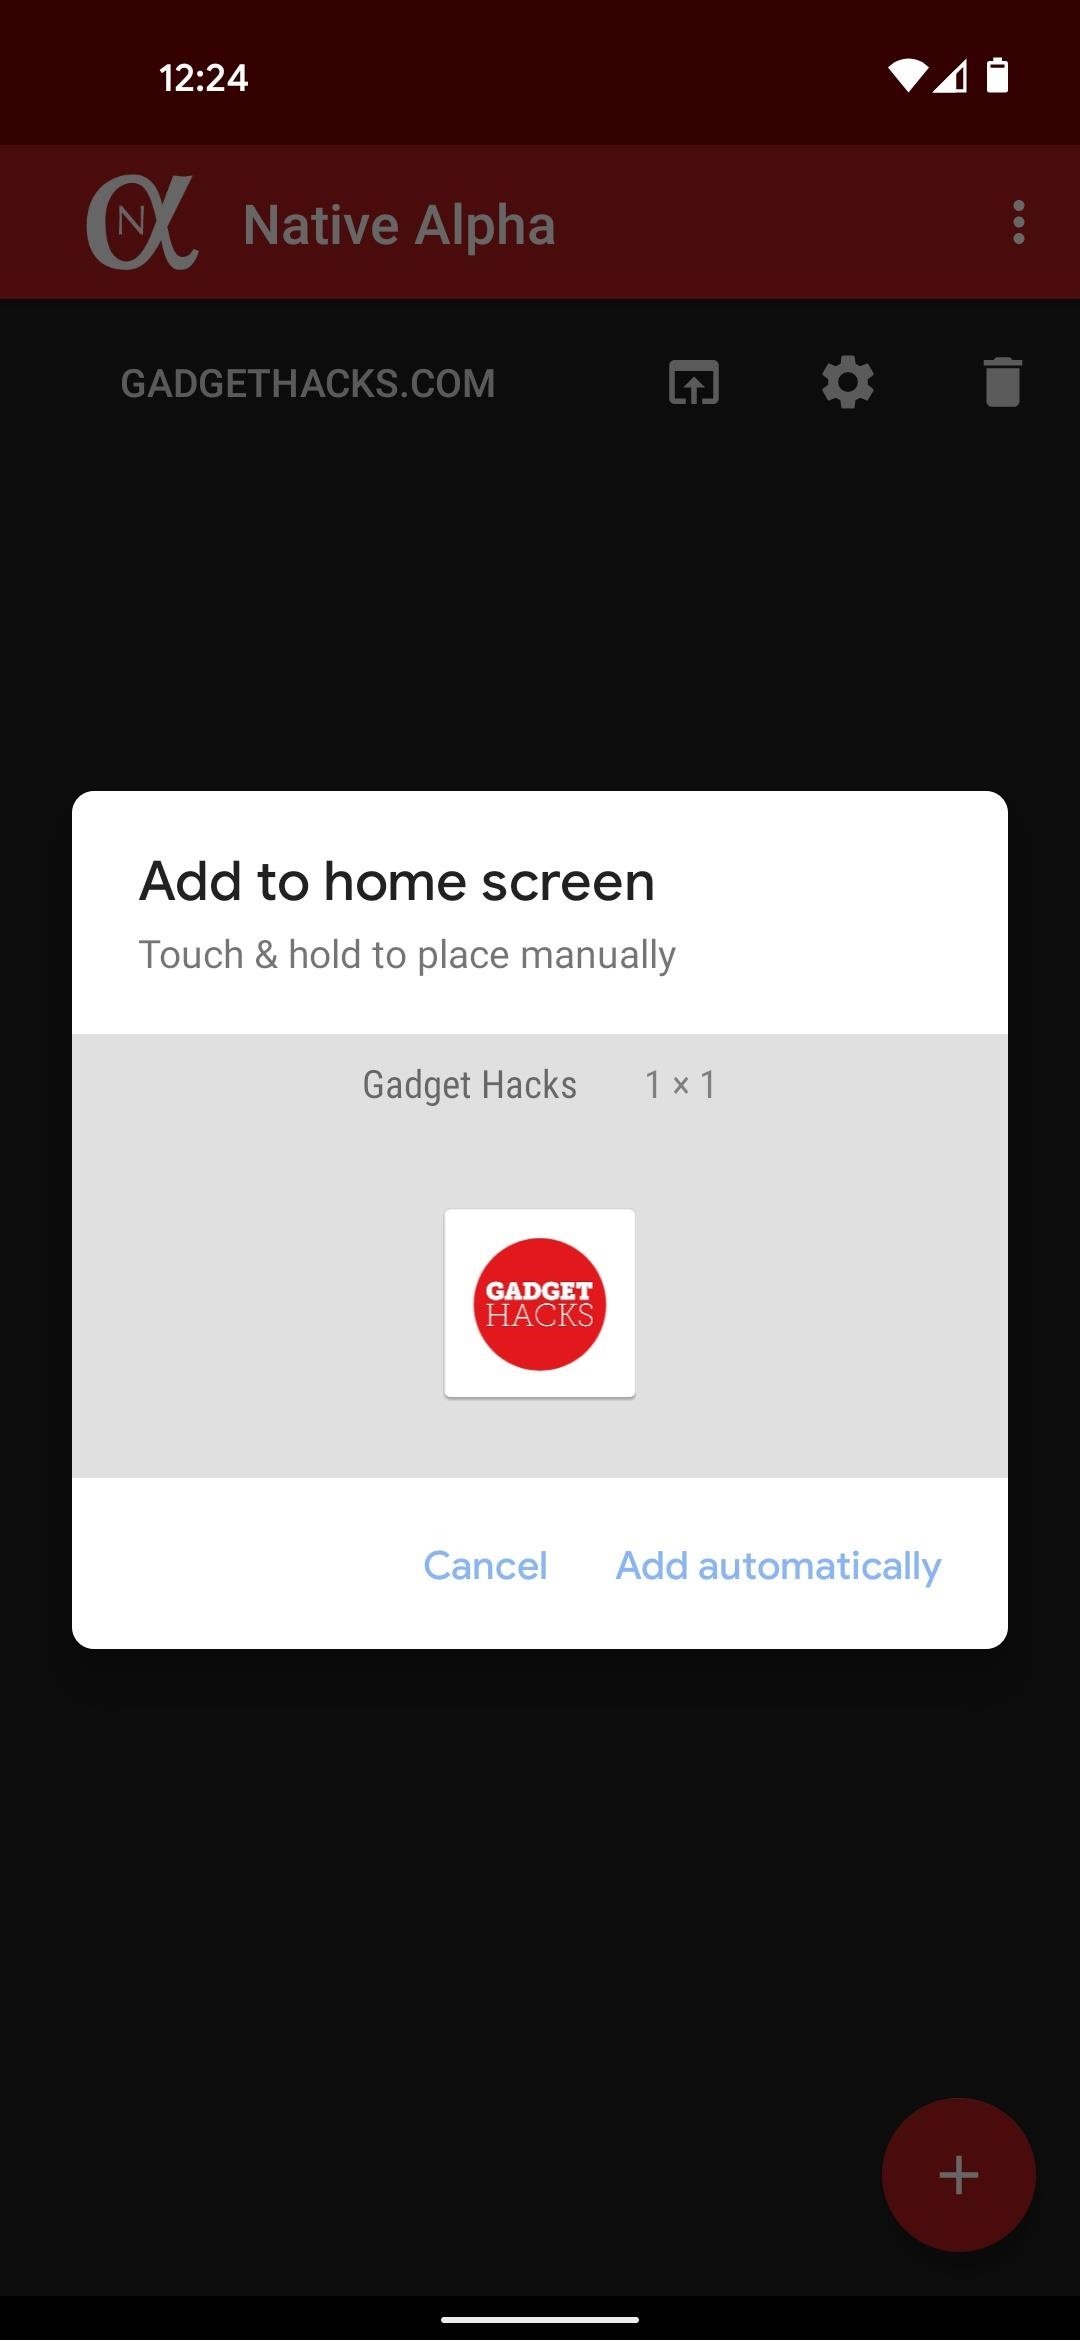 How to Turn Any Website into a Full-Screen Android App with Ad Blocking, Dark Mode & More